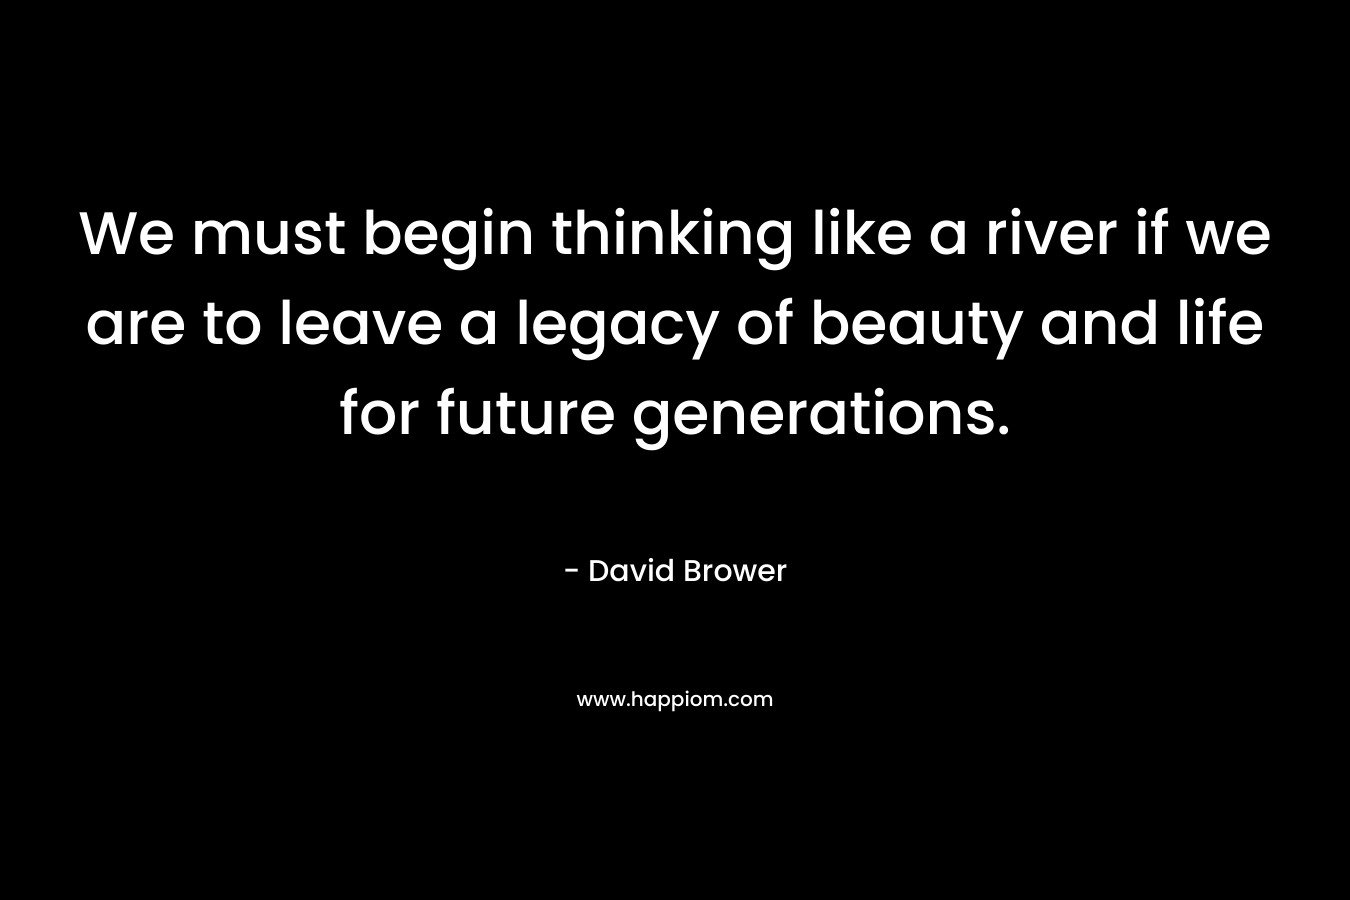 We must begin thinking like a river if we are to leave a legacy of beauty and life for future generations. – David Brower